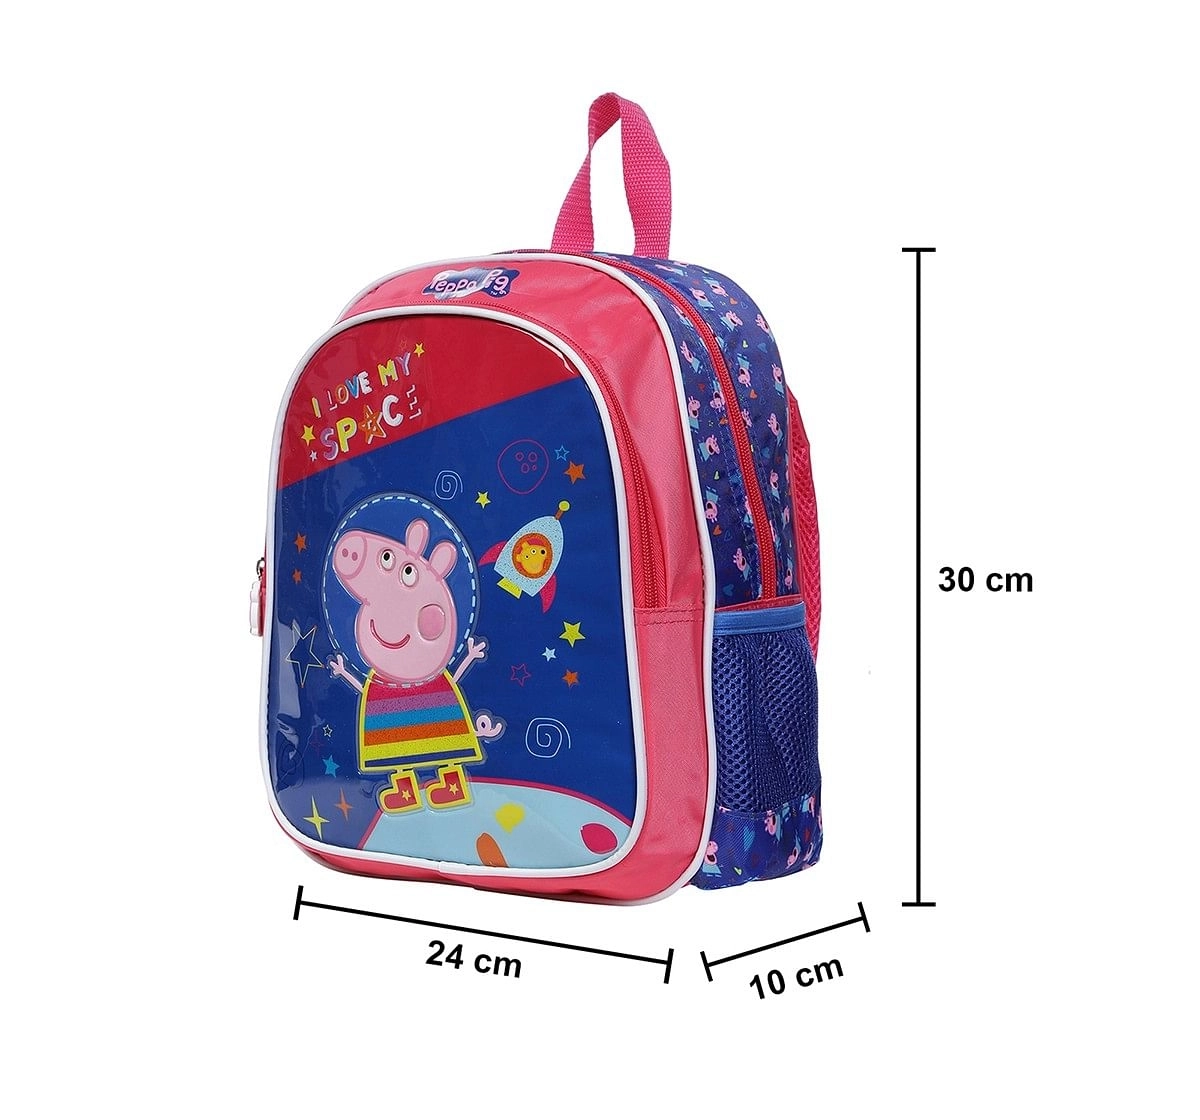  Peppa Pig I Love My Space 12 Backpack Bags for Kids age 3Y+ 